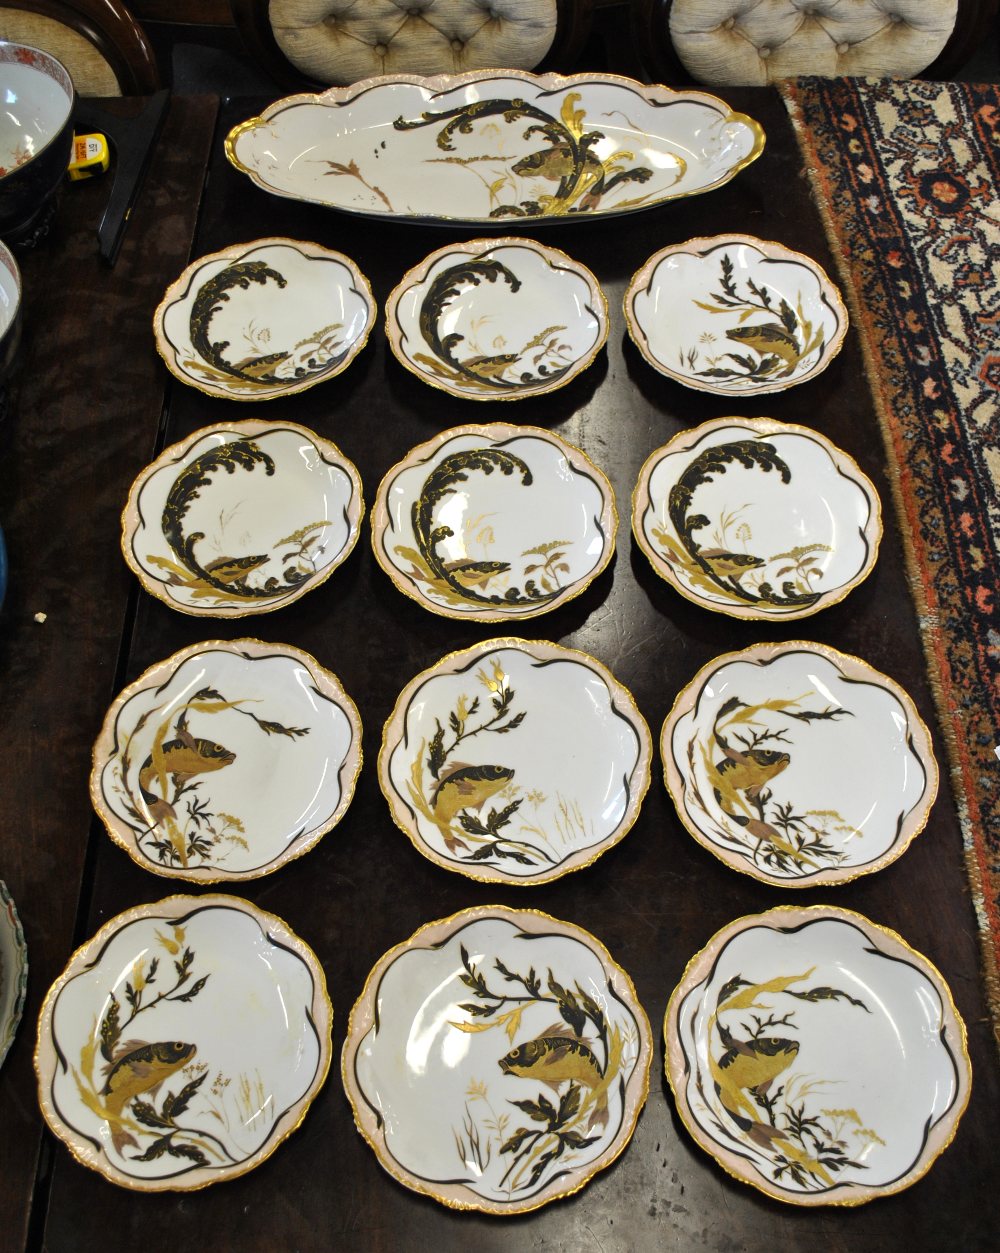 S & S Limoges porcelain fish service decorated in the Japanese style with a fish in reeds,